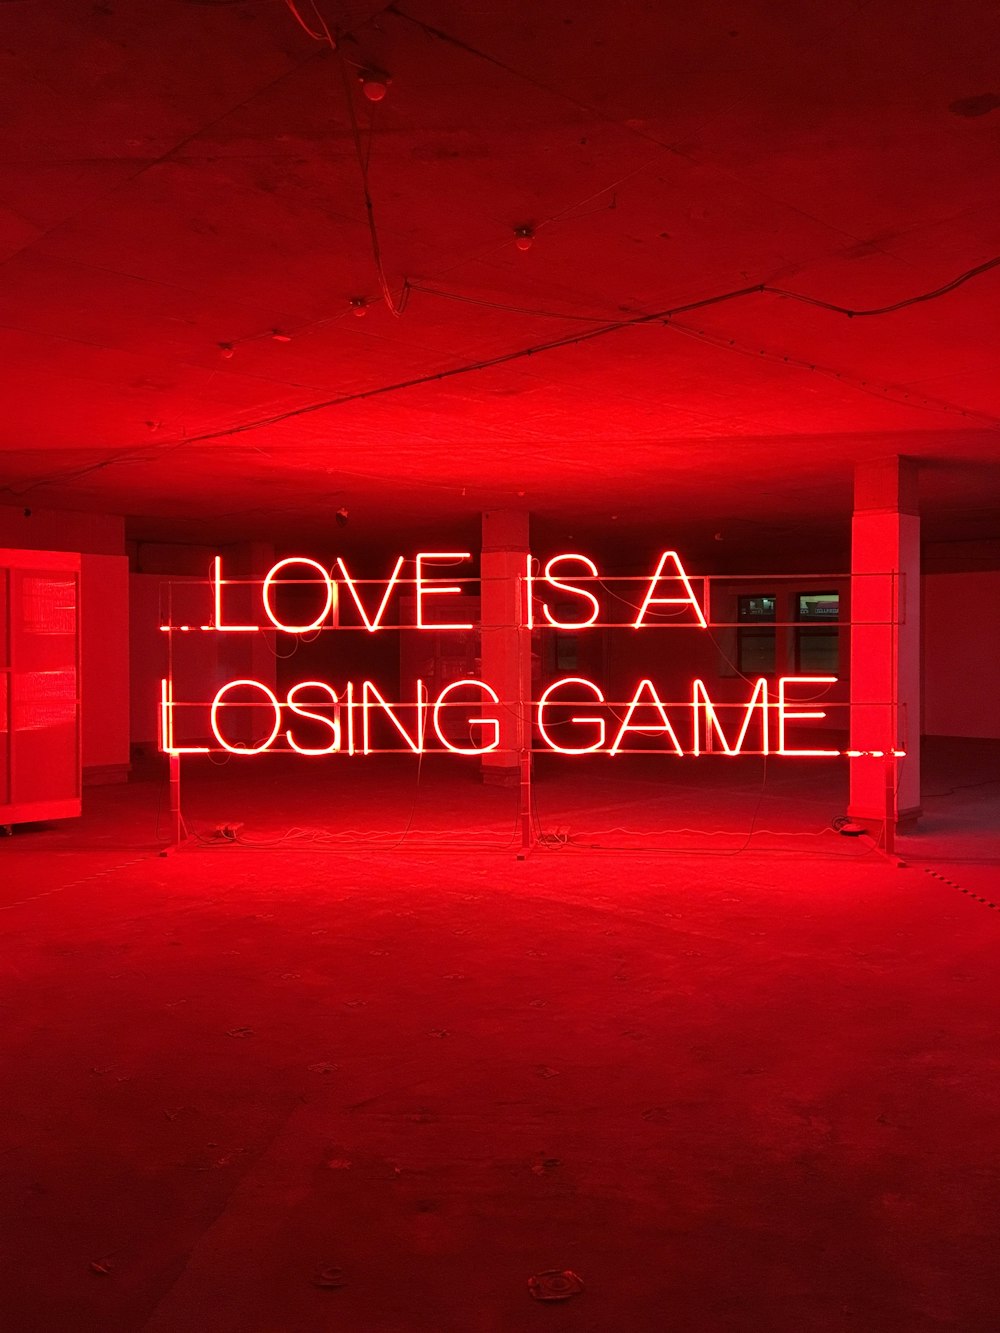 Love is A Losing Game text